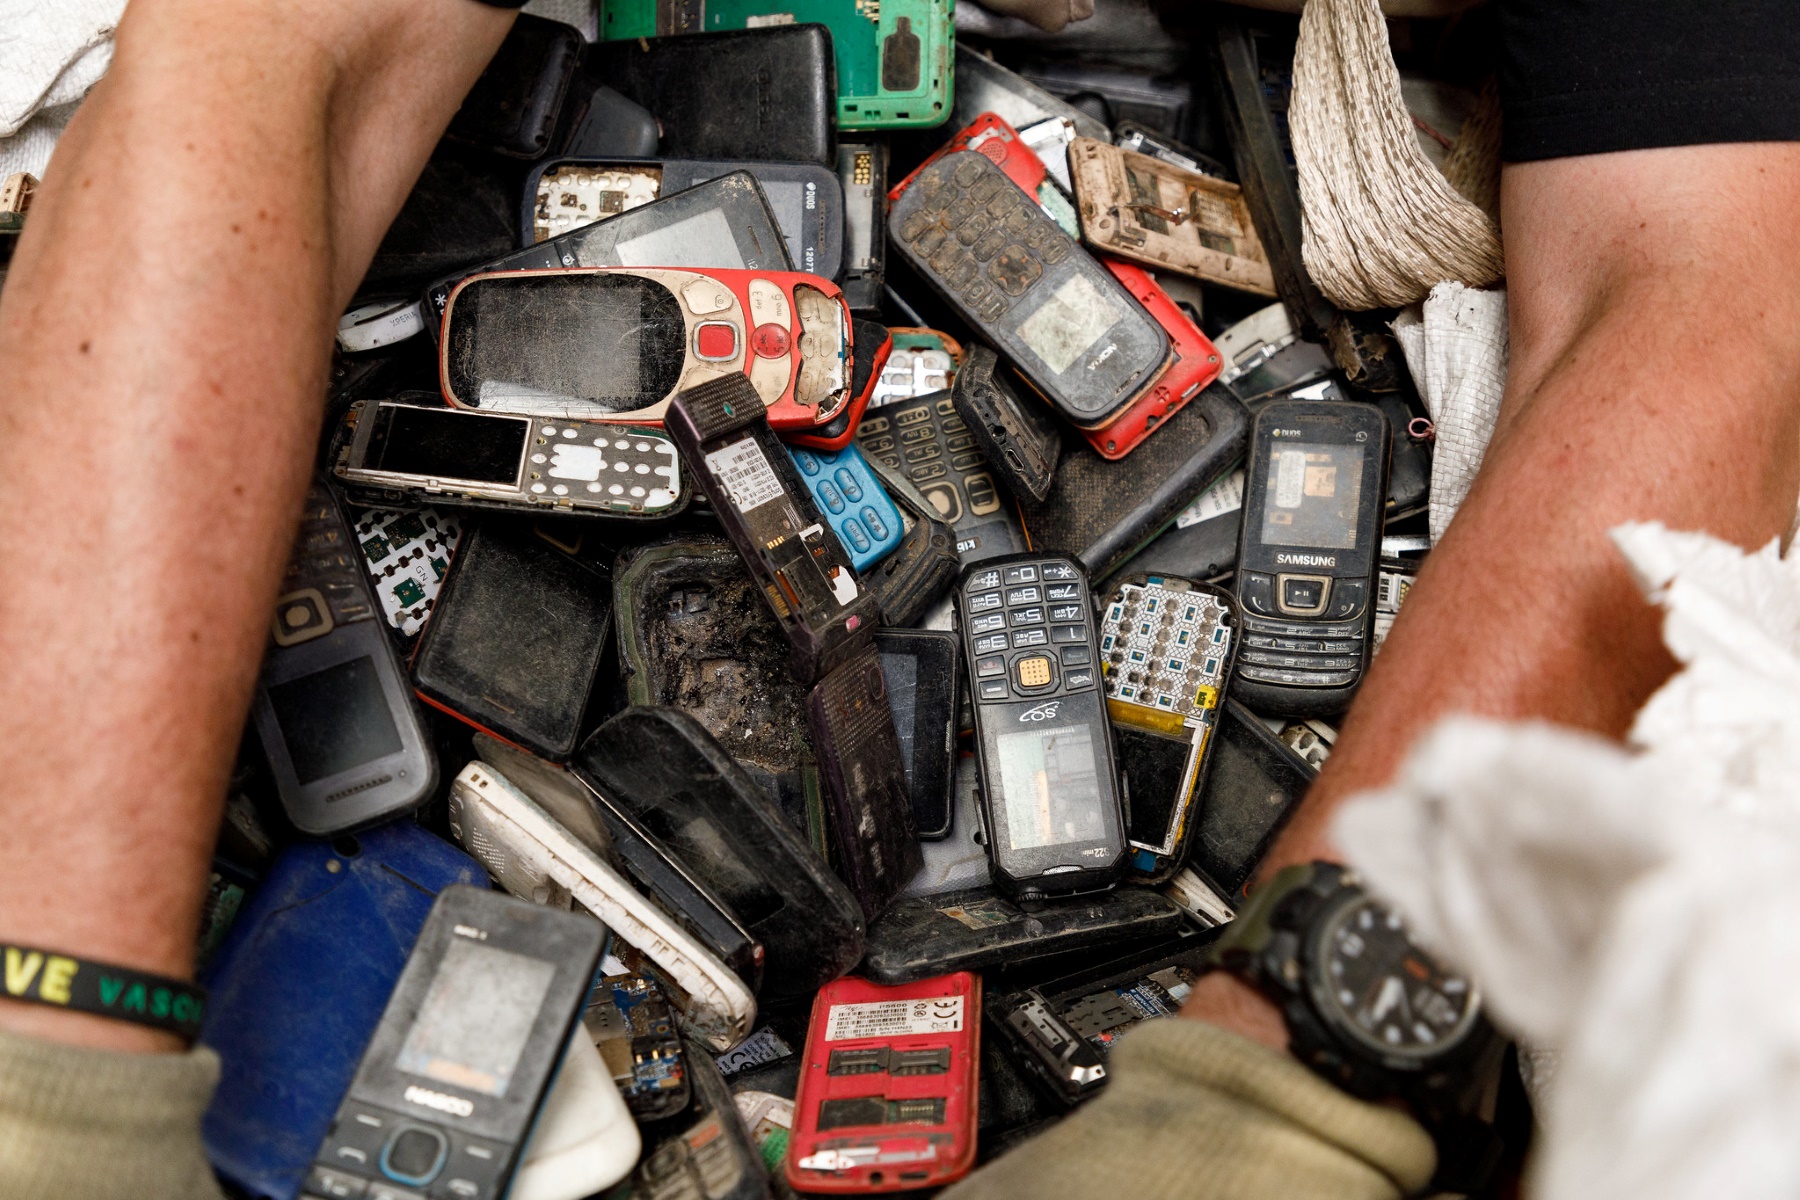 The vast amounts of e-waste produced by discarded technology present huge challenges. : ‘E-waste recycling’ by Fairphone, via Flickr https://flic.kr/p/2oozP1p CC BY-SA 2.0